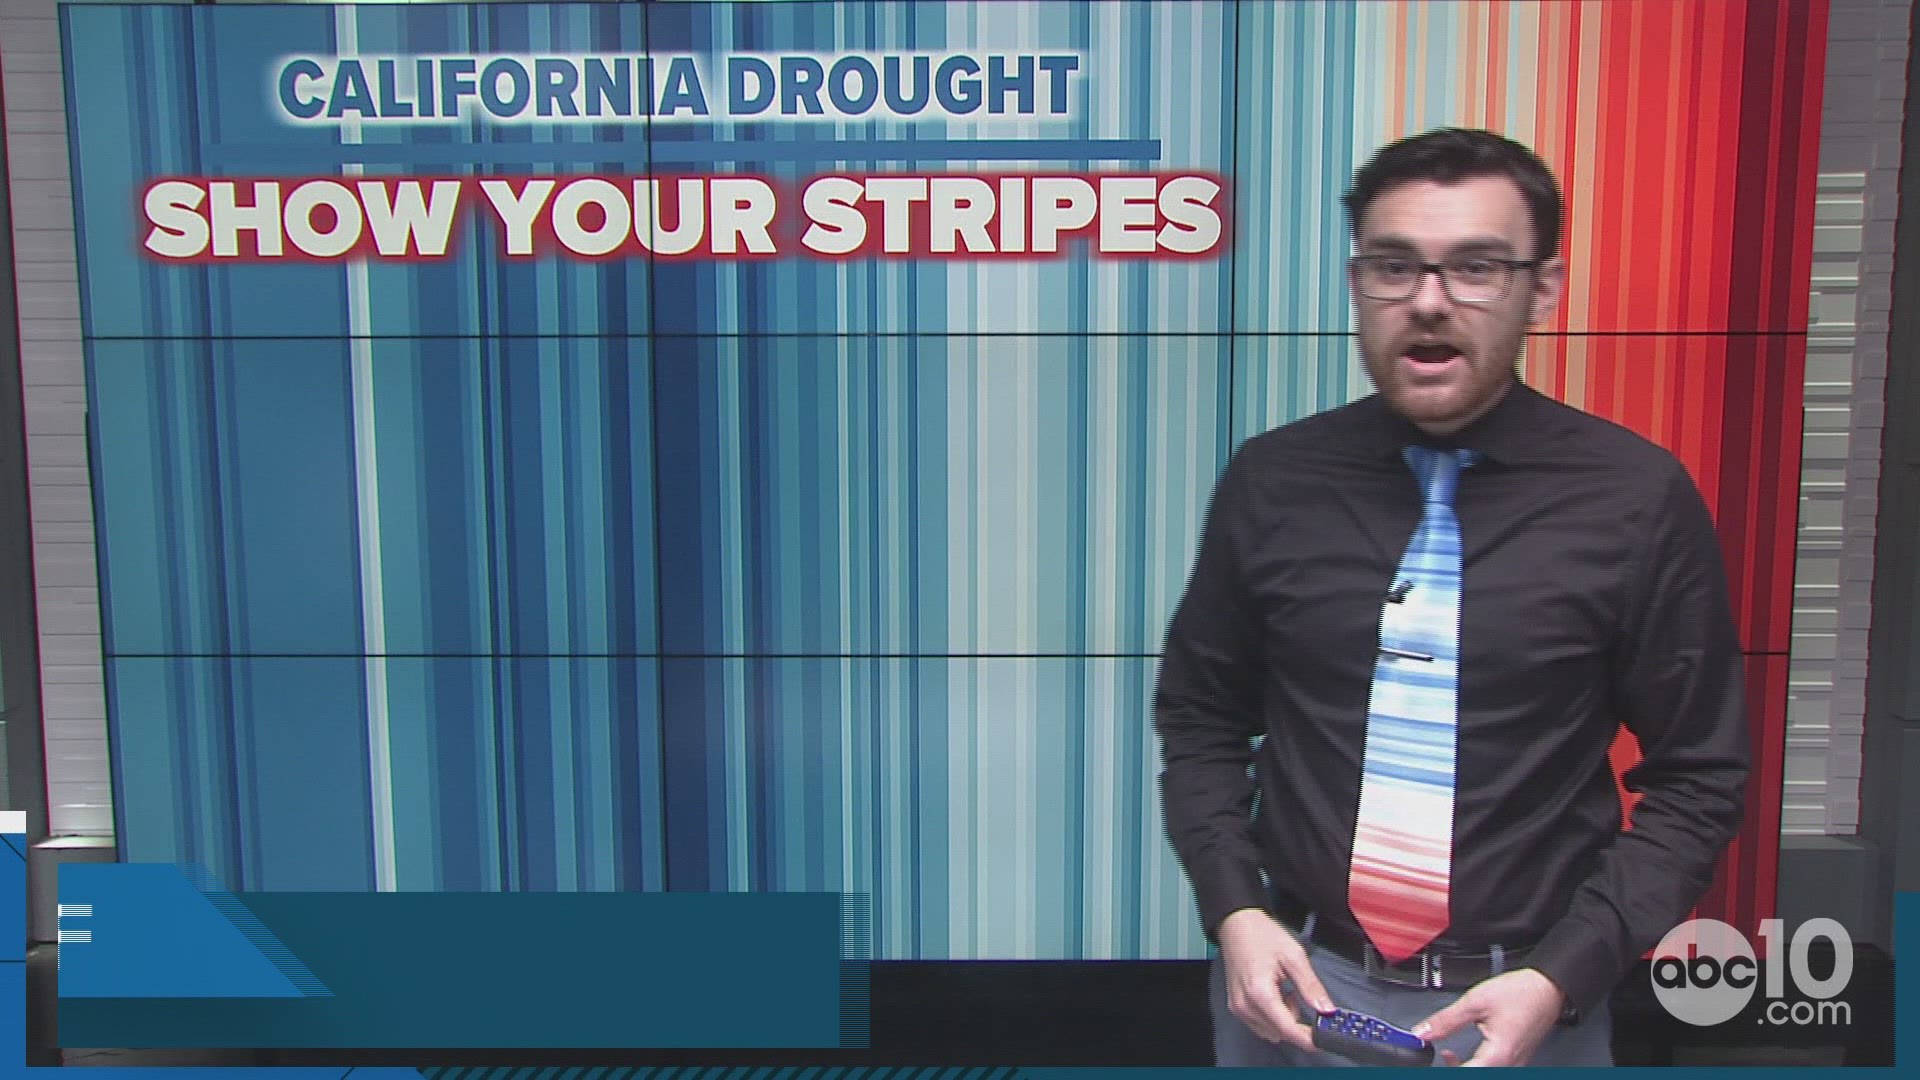 It's now officially summer in Northern California and there is still snow in the Sierra! Plus, ABC10 meteorologist Brenden Mincheff shows California's stripes